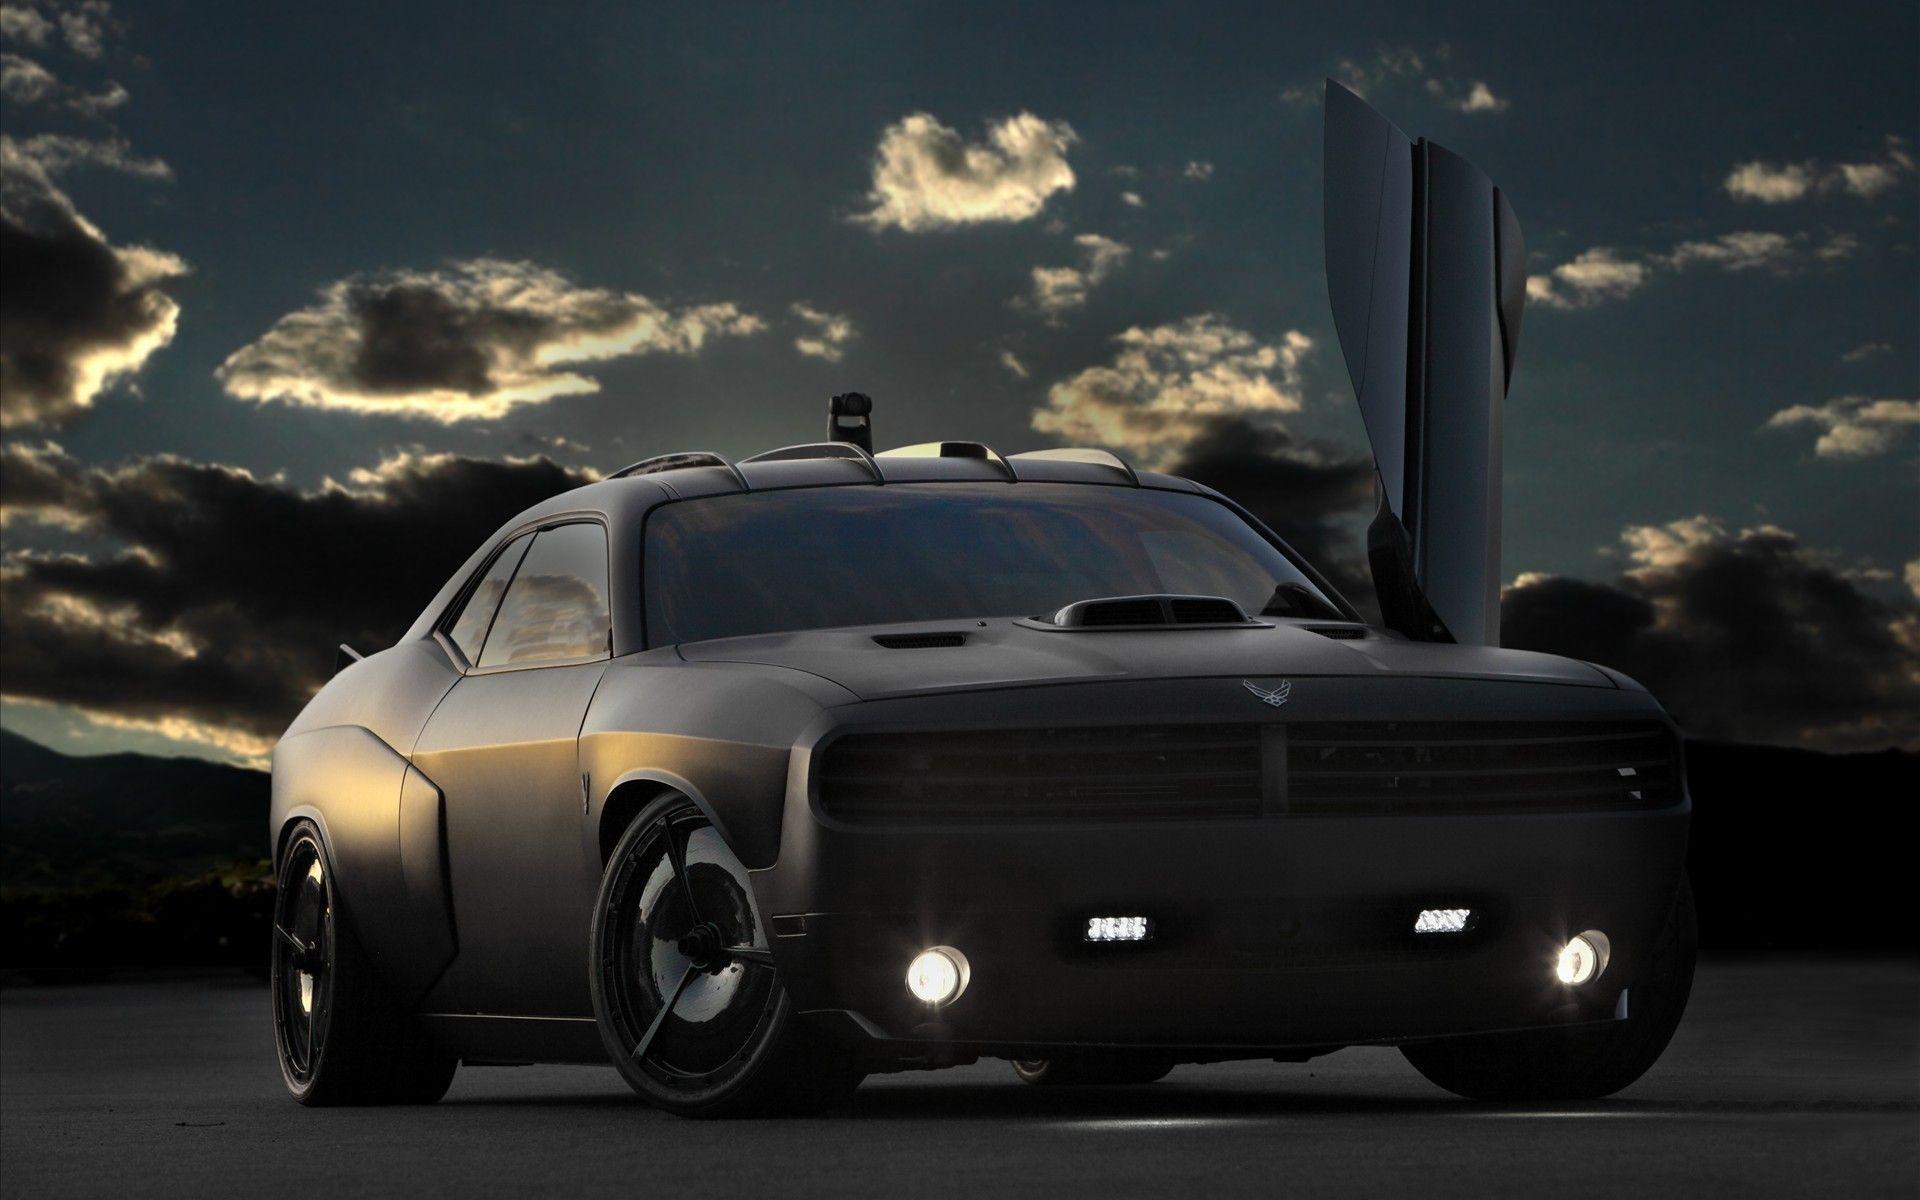 cool car wallpaperfree moving wallpaper Search Engine